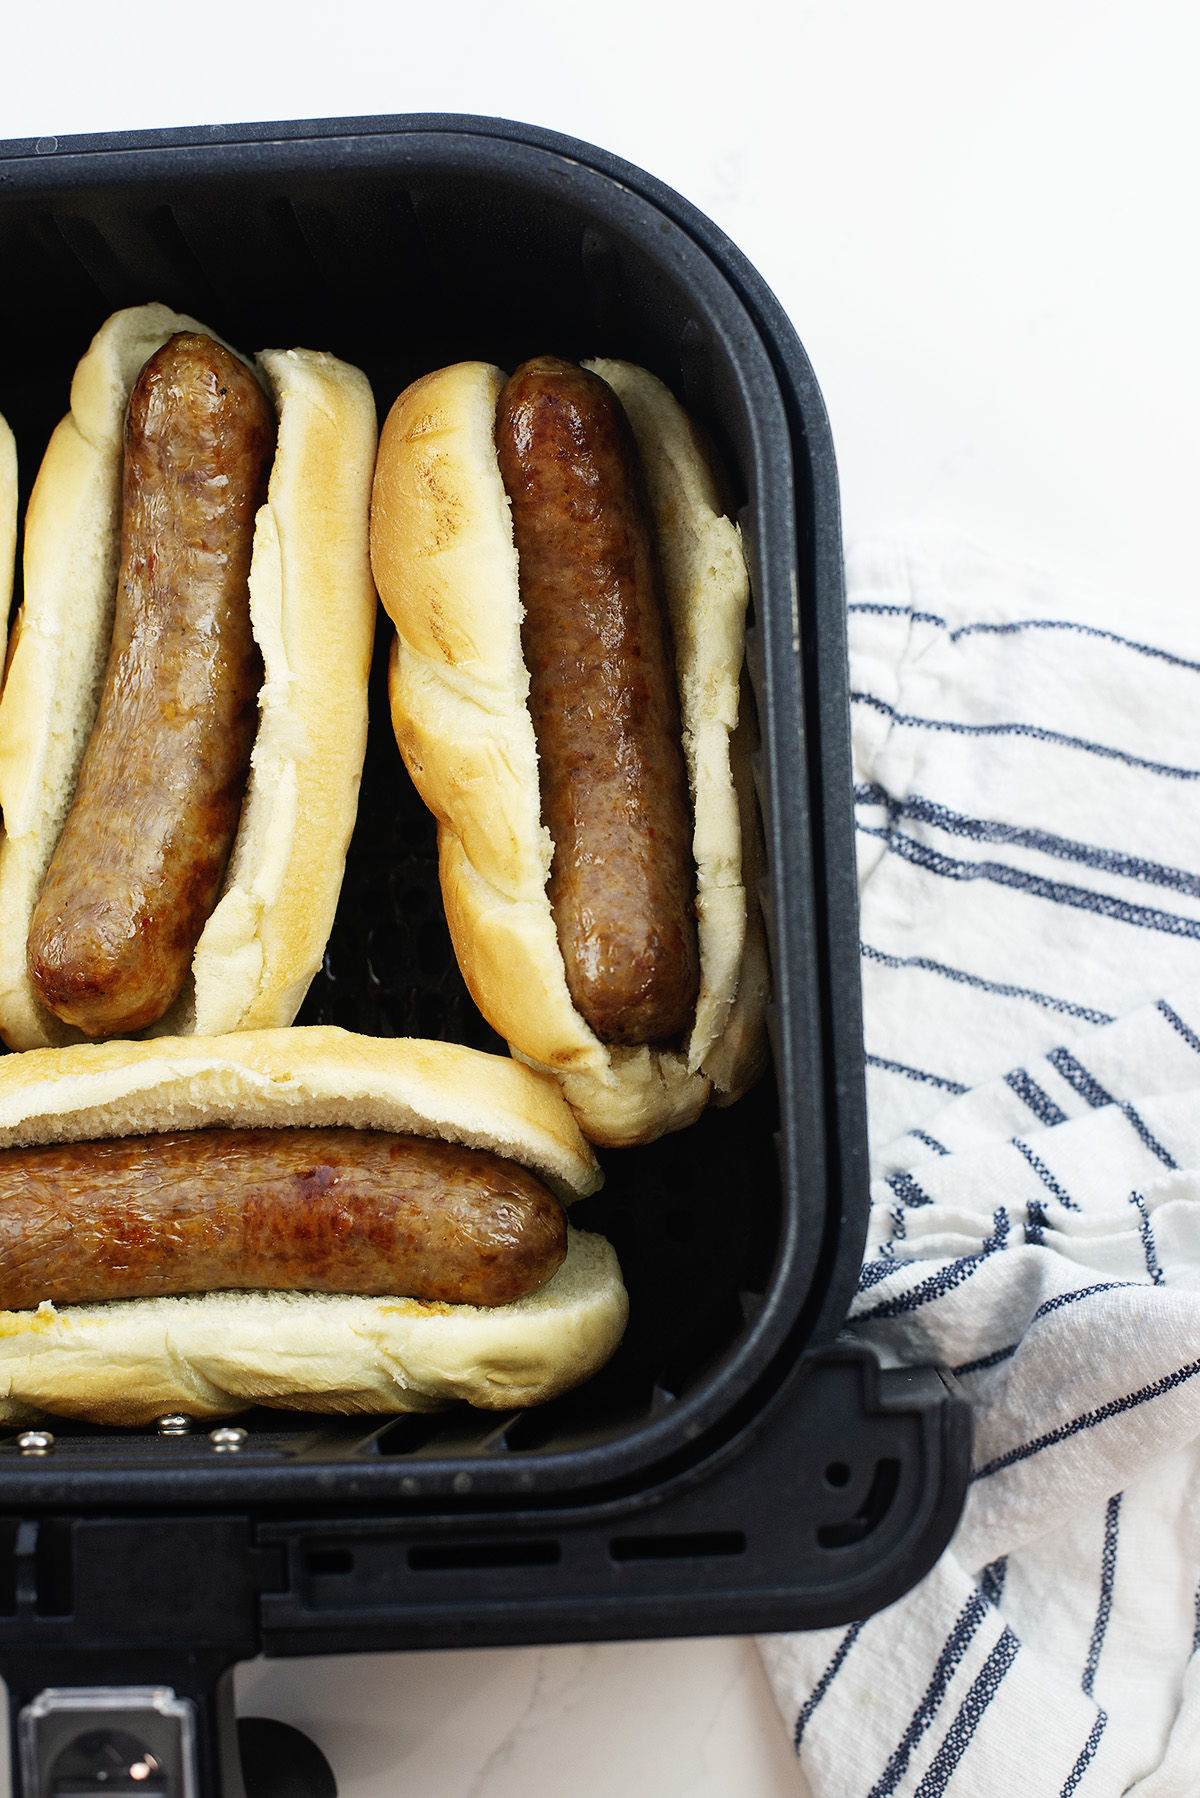 A few Italian sausages on buns in an air fryer basket.